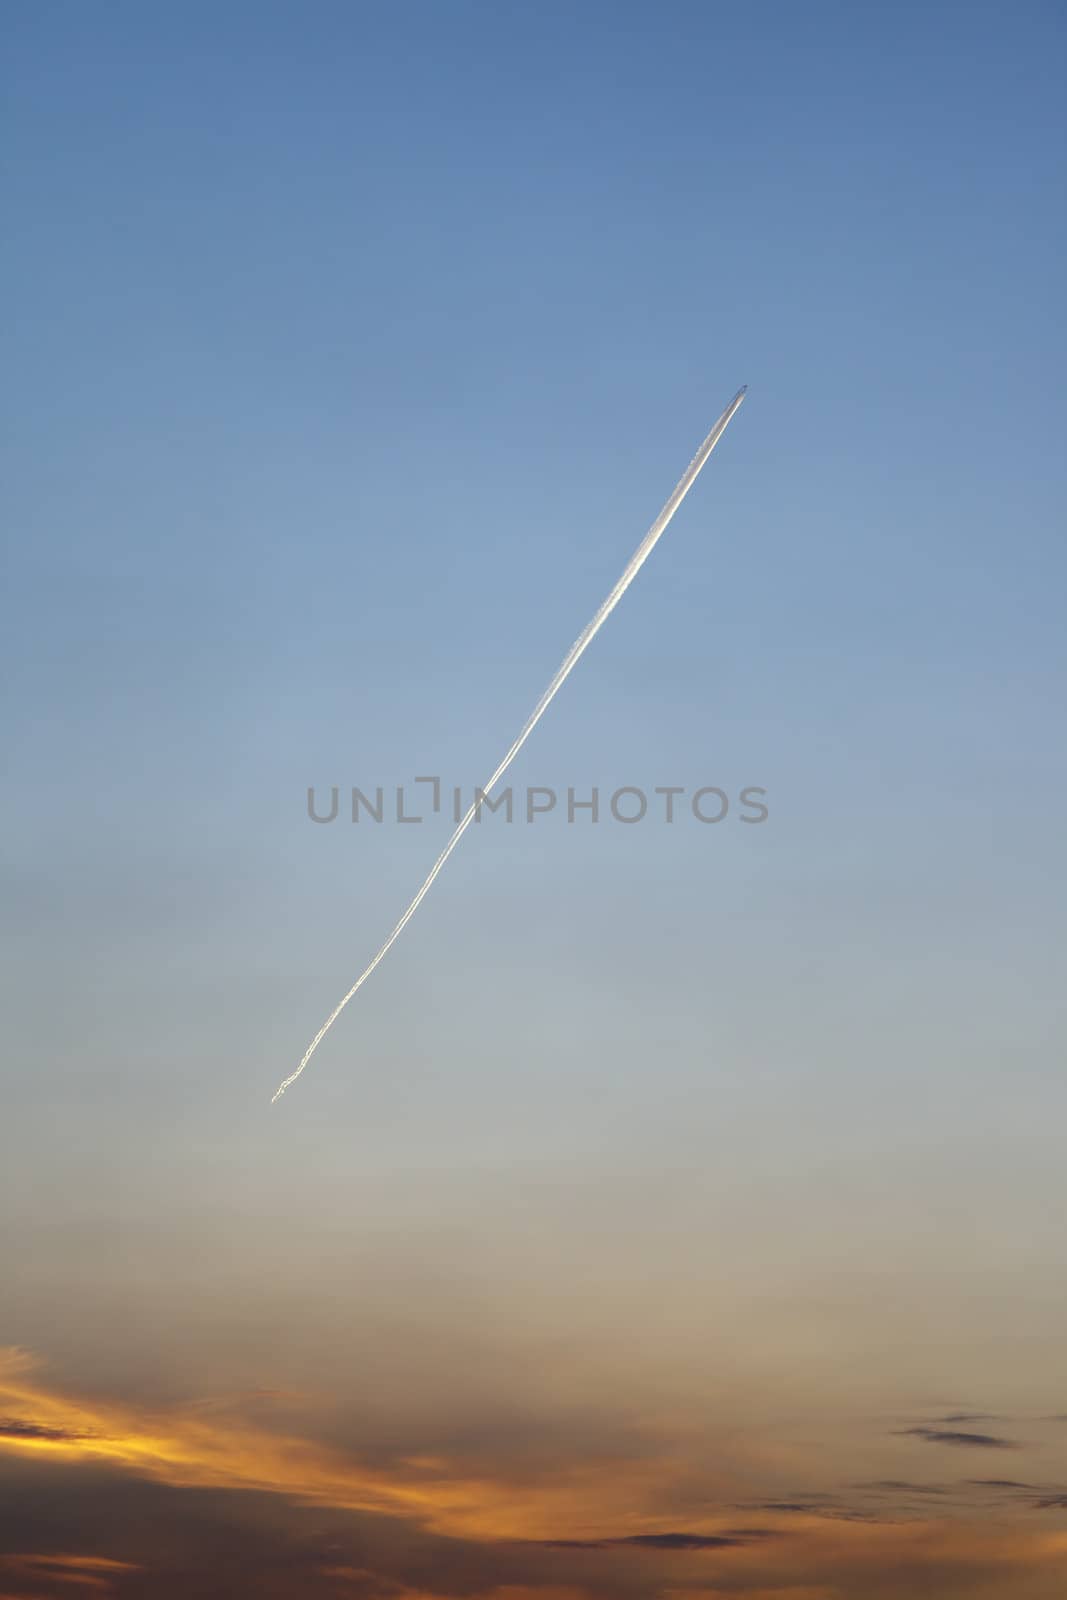 An image of a plane in the morning sky